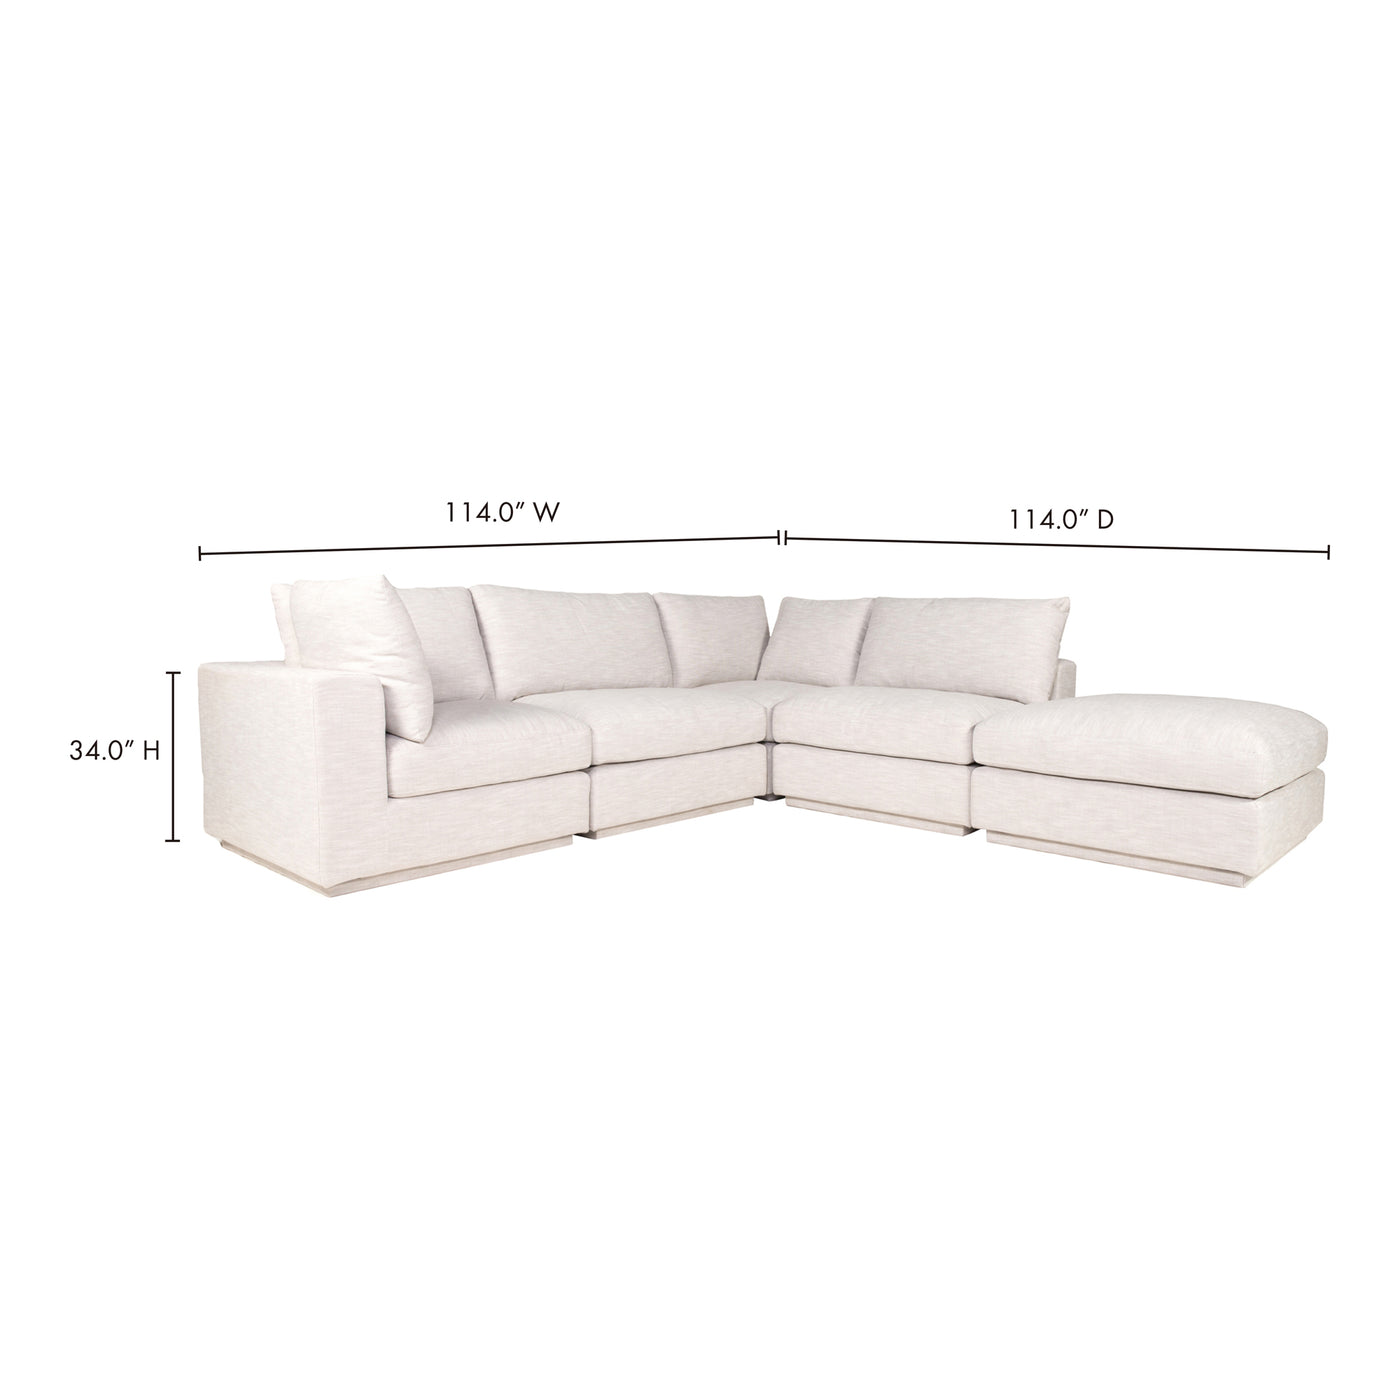 An everyday modular marvel. The Justin dream modular sectional is all about options, so sizing and space-fitting are up to...